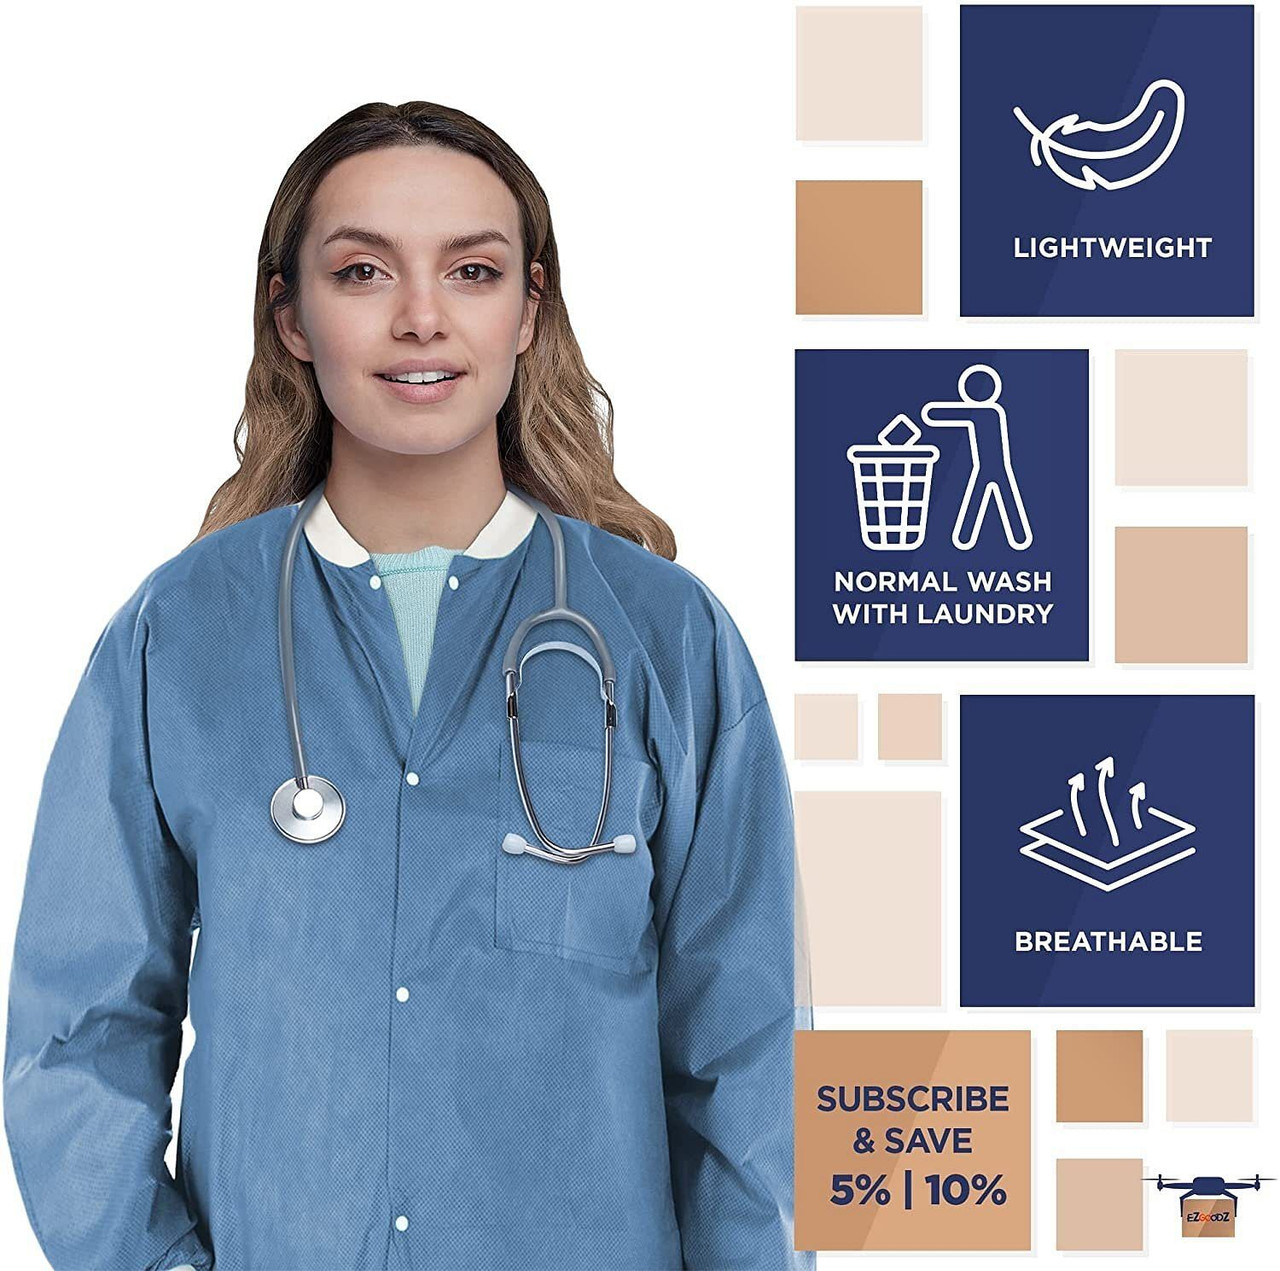 Disposable Lab Jackets. Pack of 10 Ceil Blue Hip-Length Work Gowns XX-Large. SMS 50 gsm Coats with 